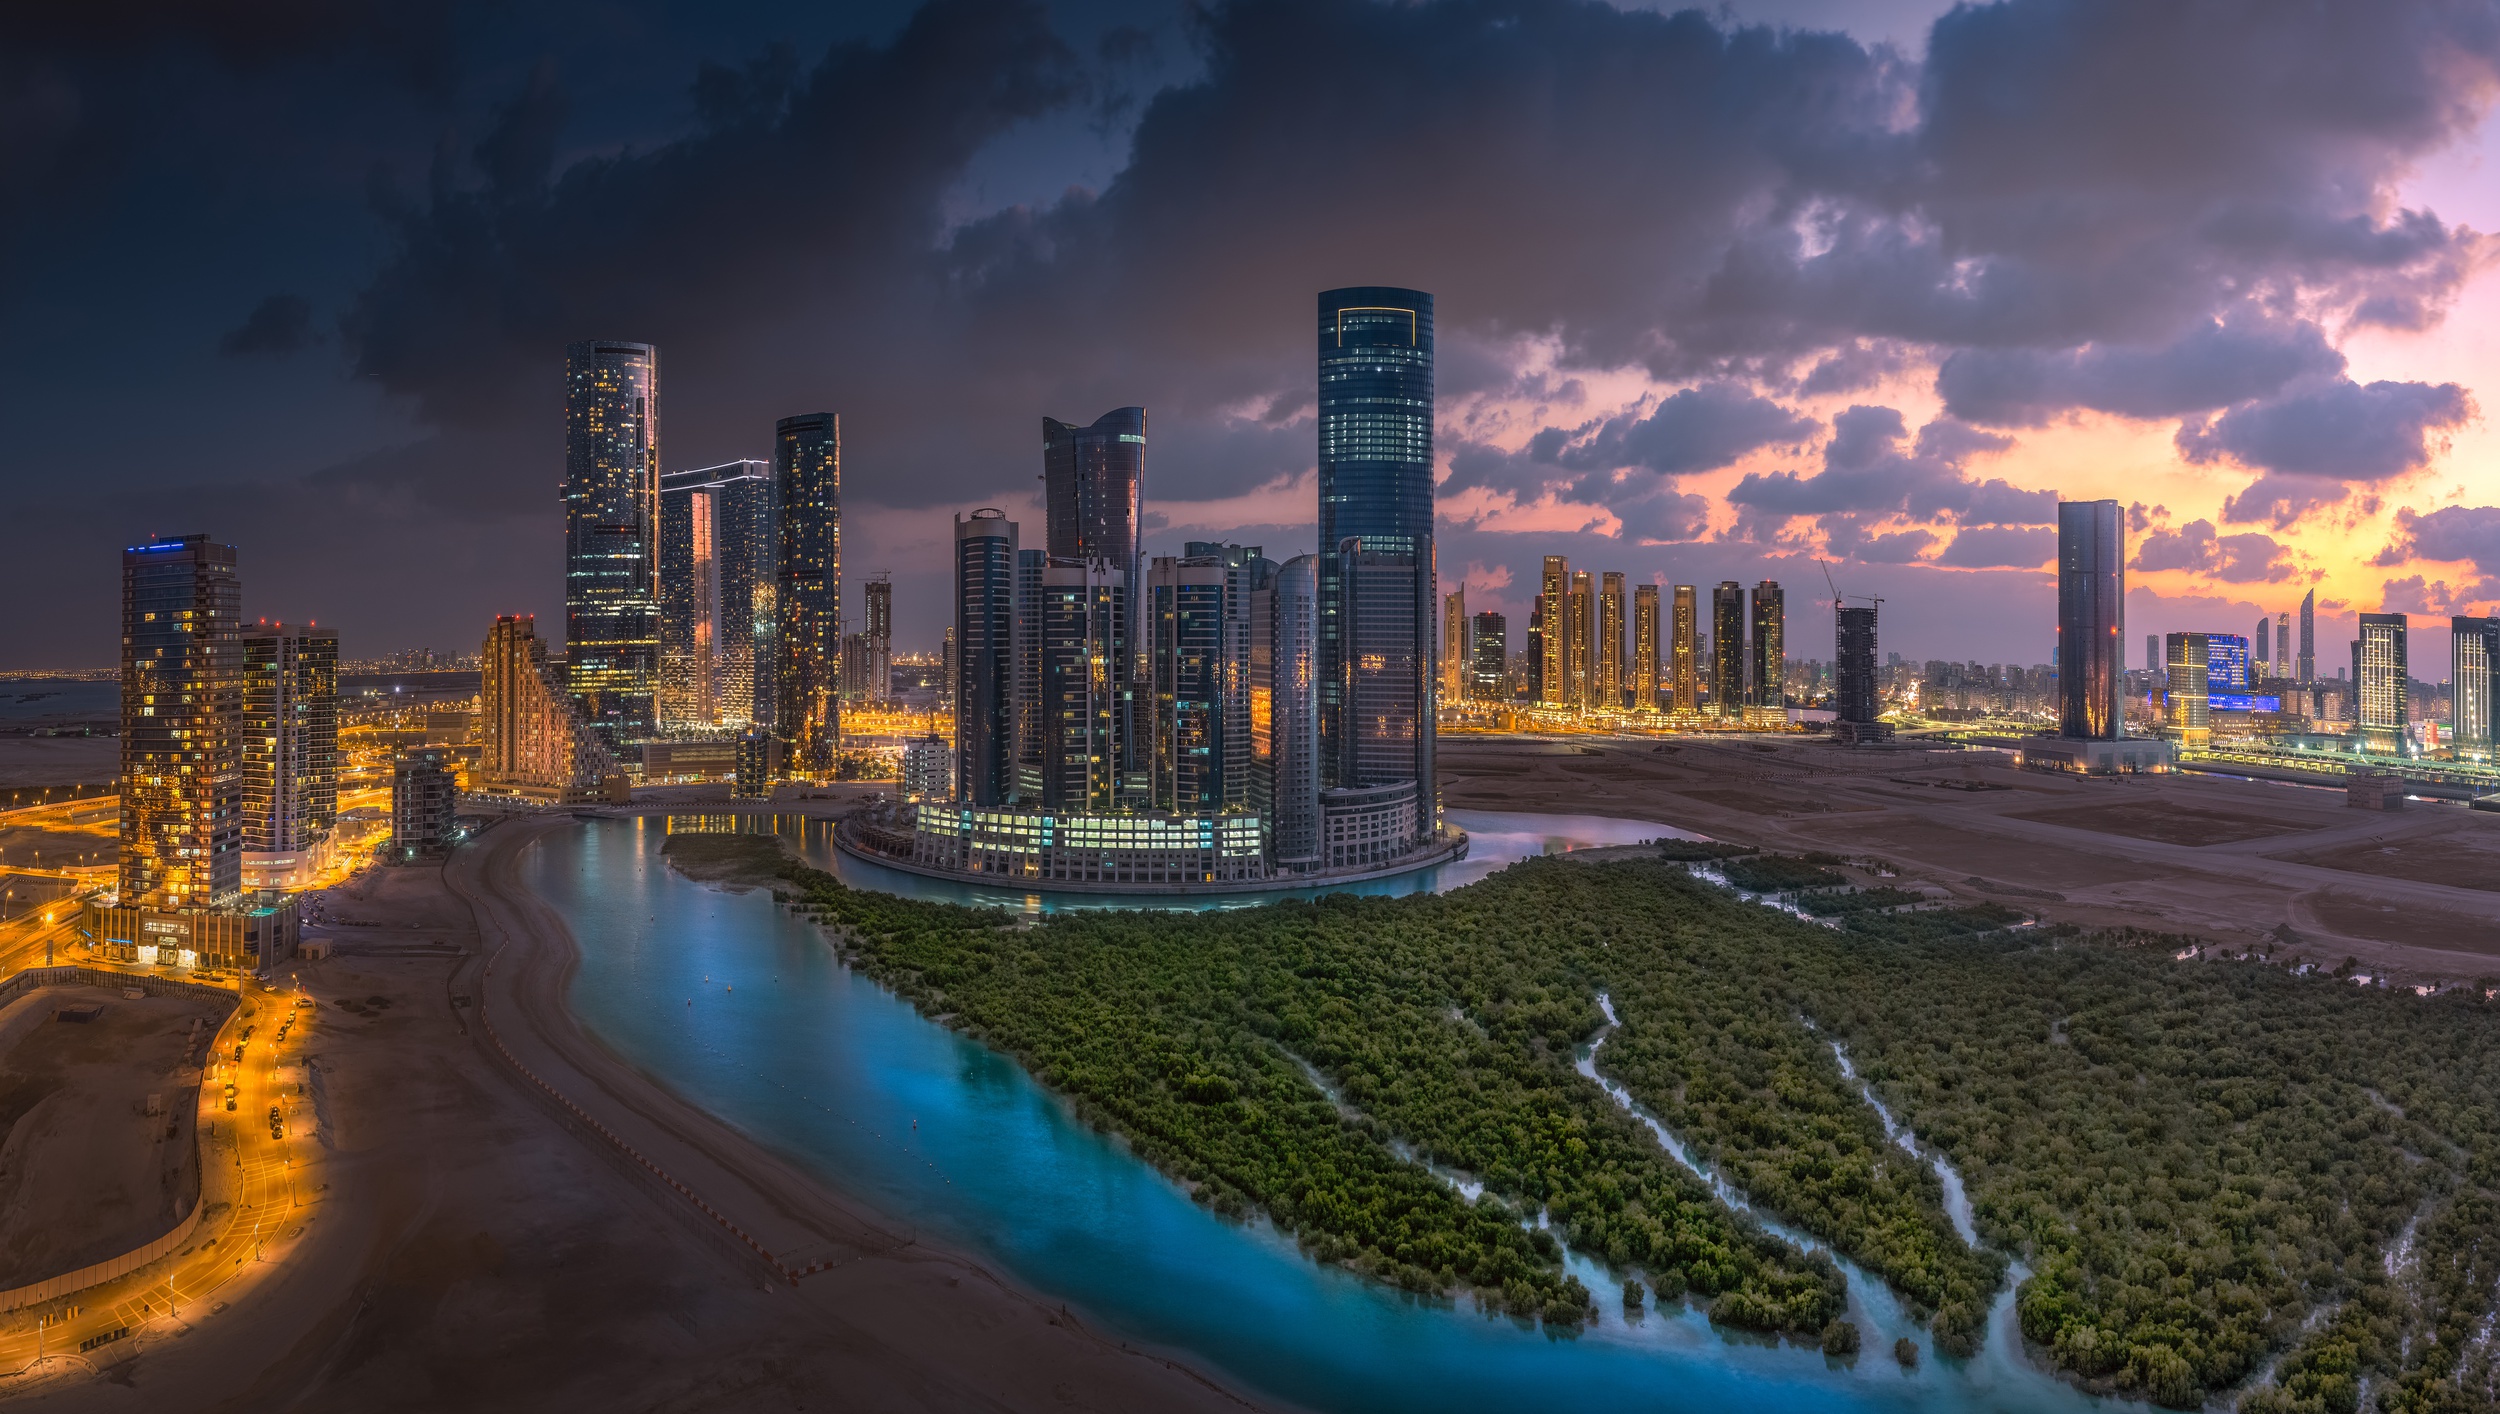 Value Of Real Estate Transactions In Abu Dhabi In 2020 Totalled AED74 Billion: Department Of Municipalities And Transport